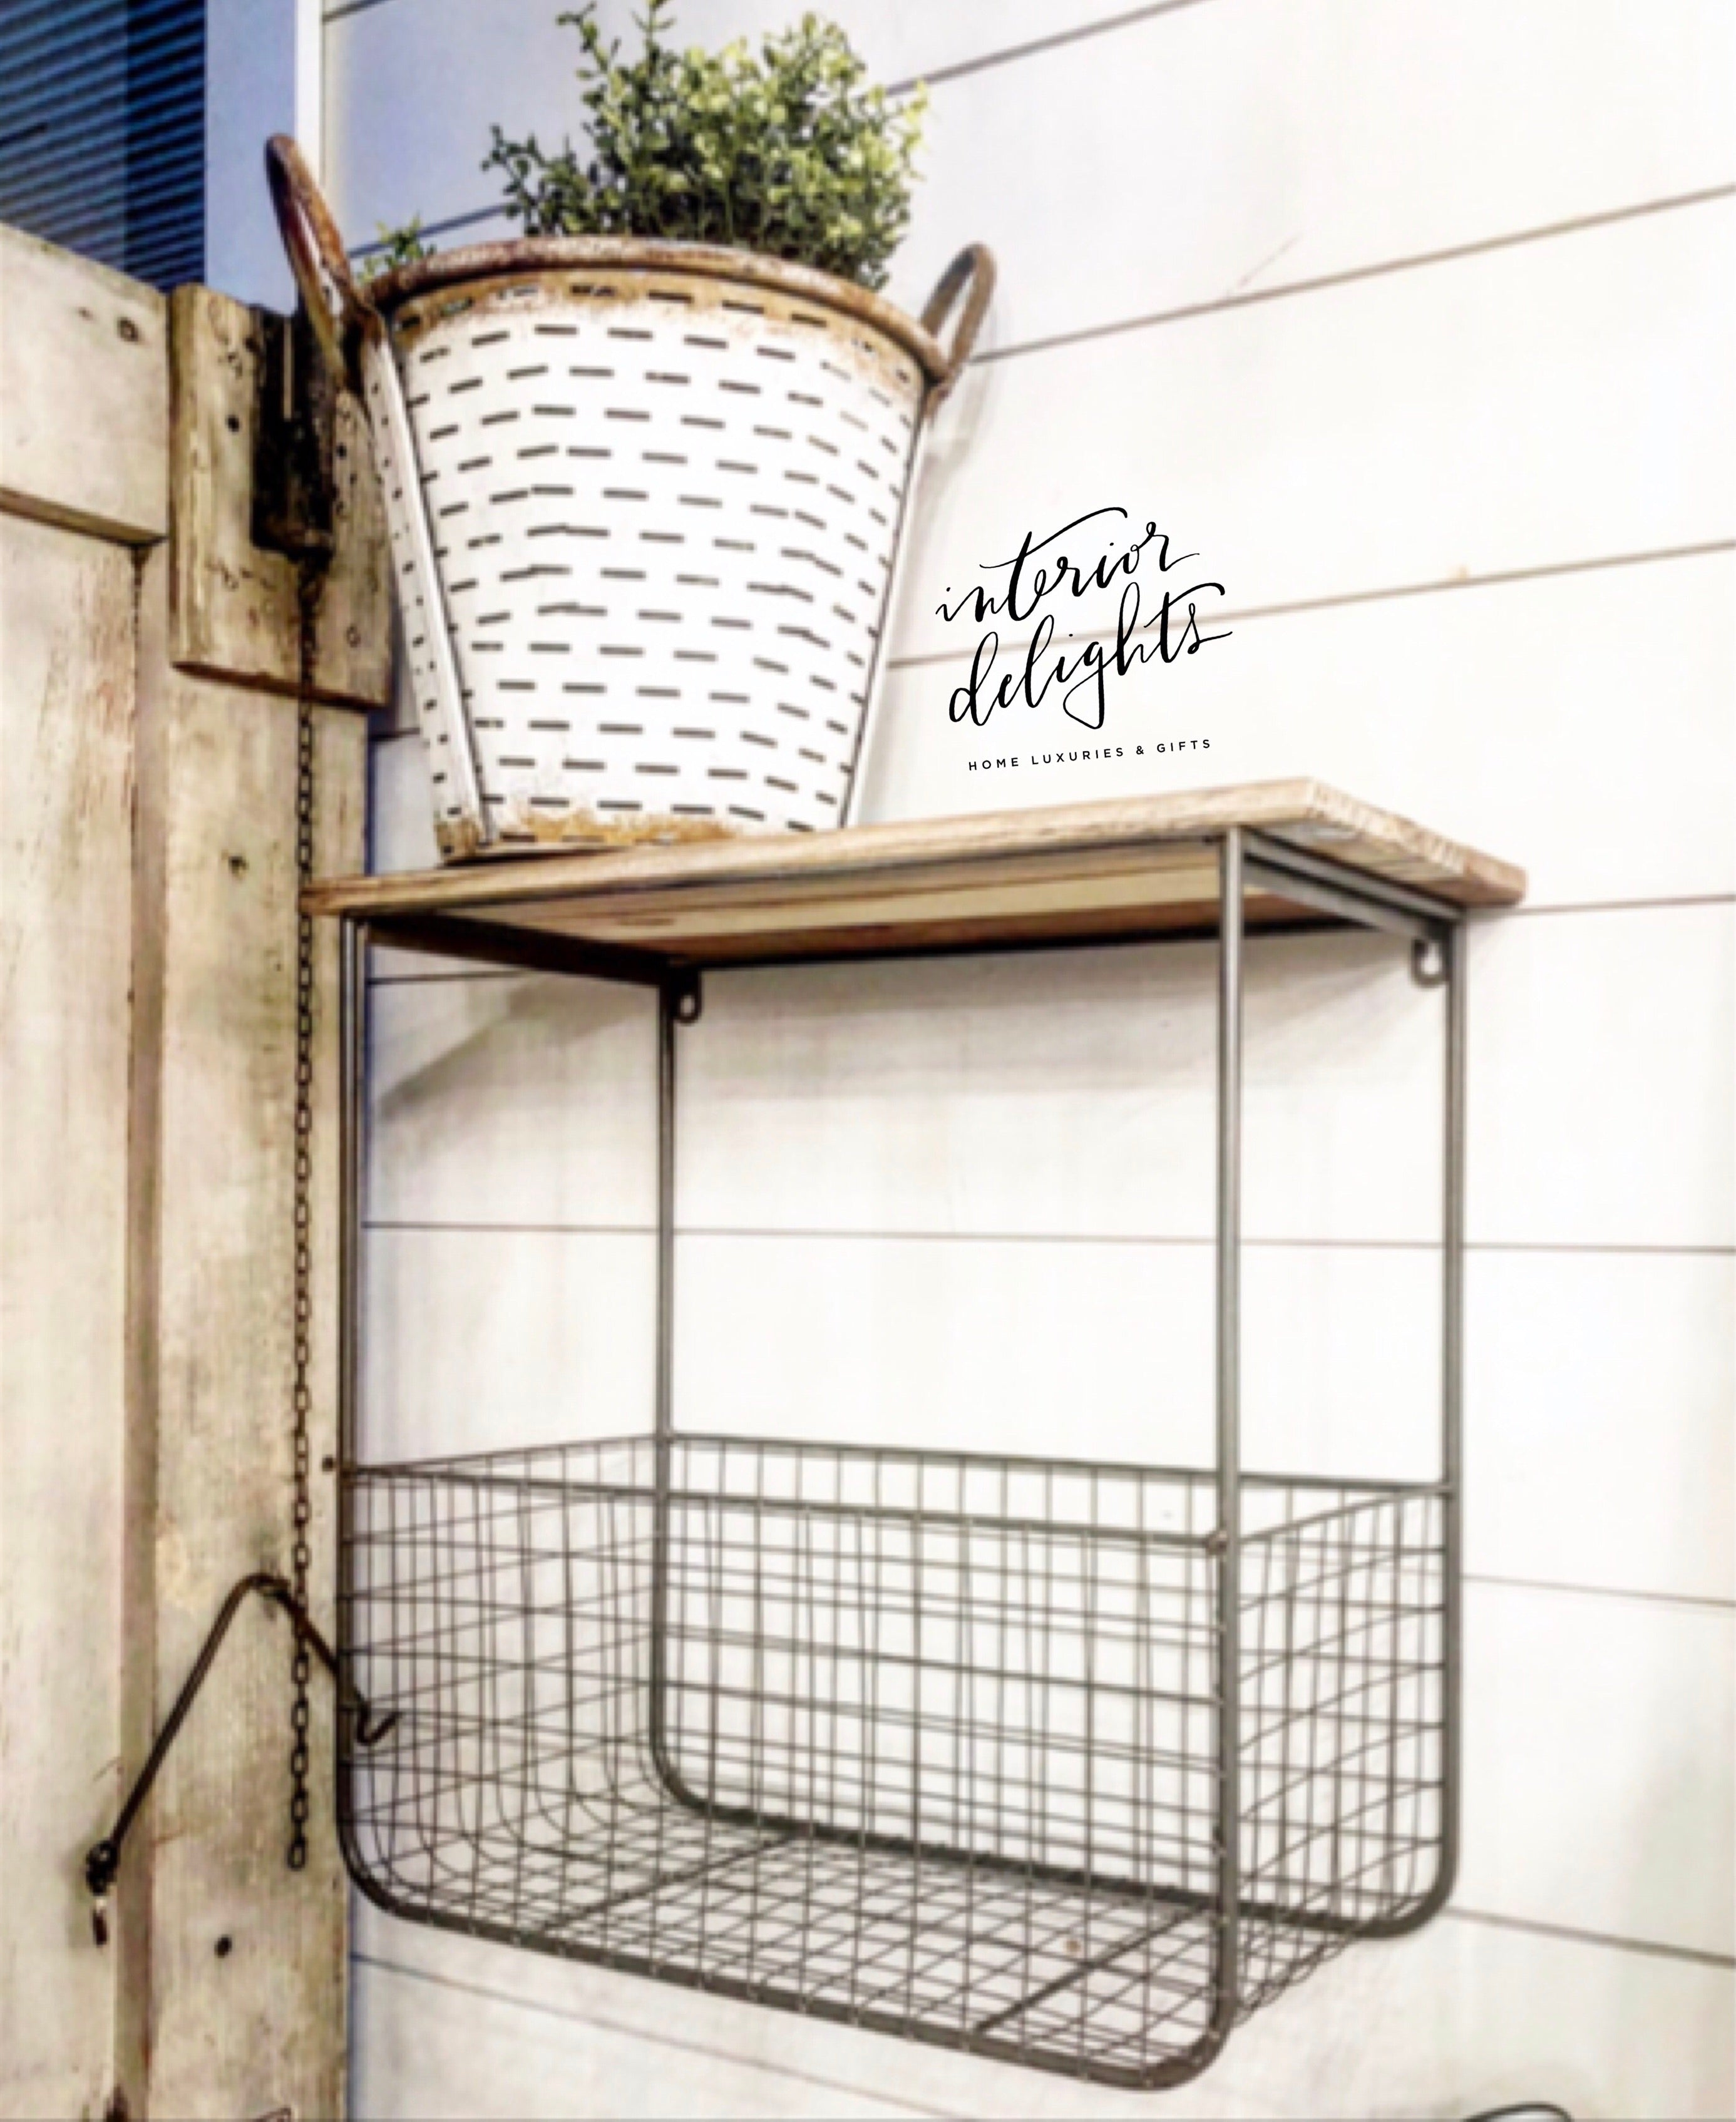 Set of two wood &amp; wire basket shelves - Interior Delights